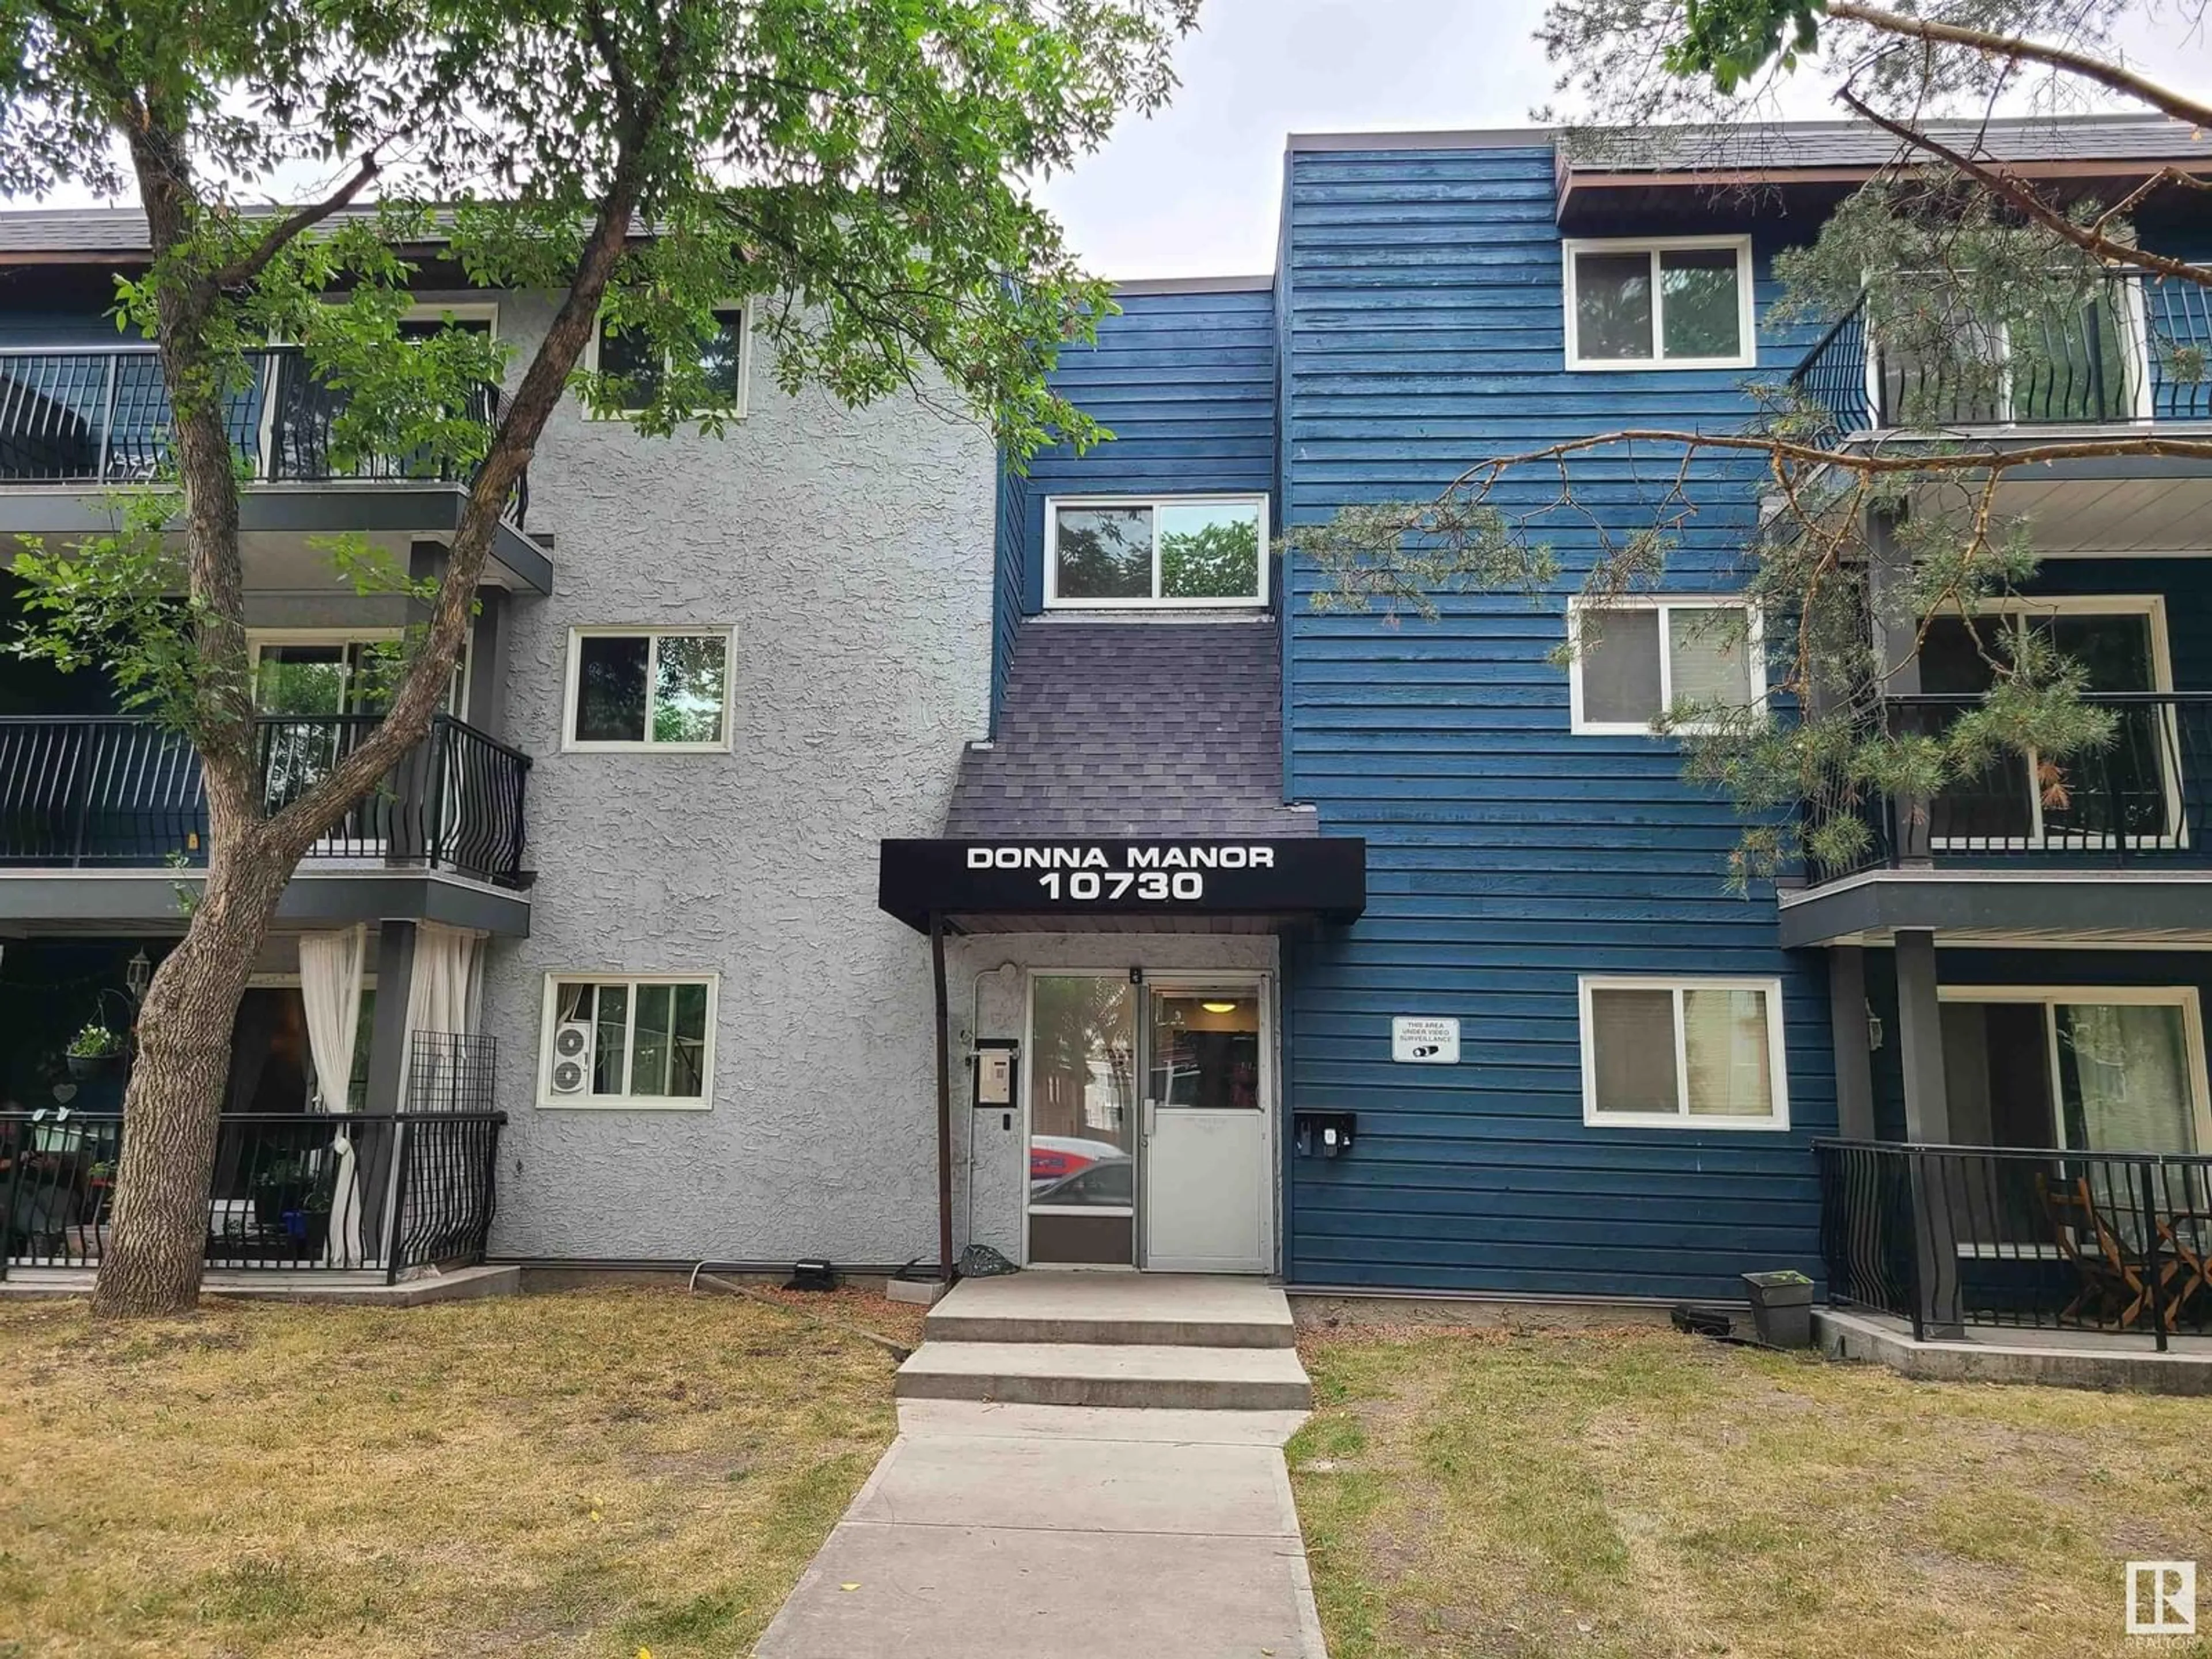 A pic from exterior of the house or condo for #204 10730 112 ST NW, Edmonton Alberta T5H3H1